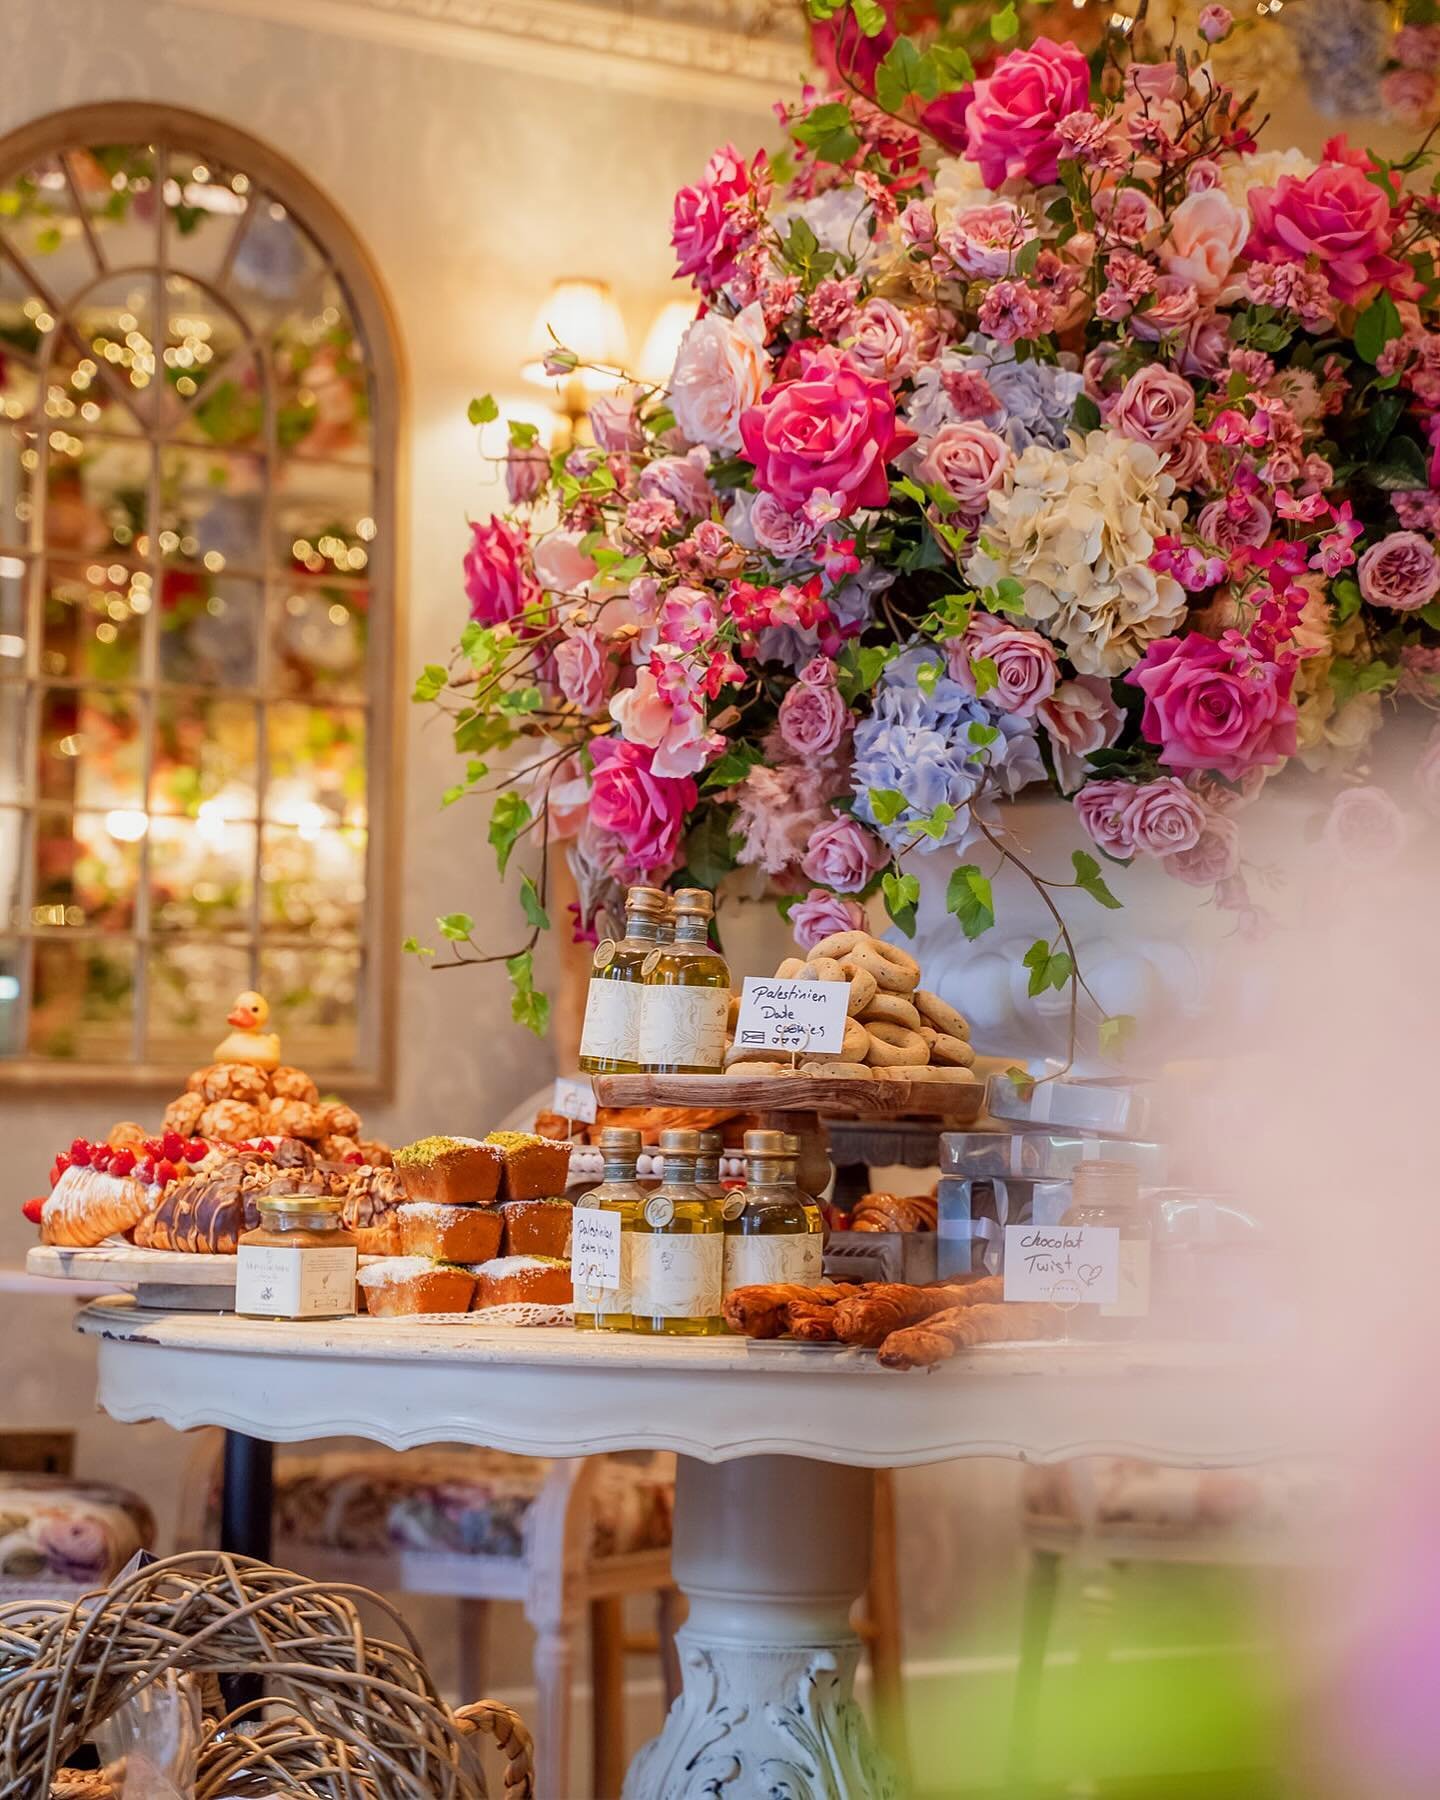 Welcome to Fait Maison Berkeley Street. 💕🌸 Whether you&rsquo;re joining us for breakfast, lunch, afternoon tea or dinner, our team at Fait Maison looks forward to serving you! ❤️

Here at Fait Maison, we have a wide array of influences that spring 